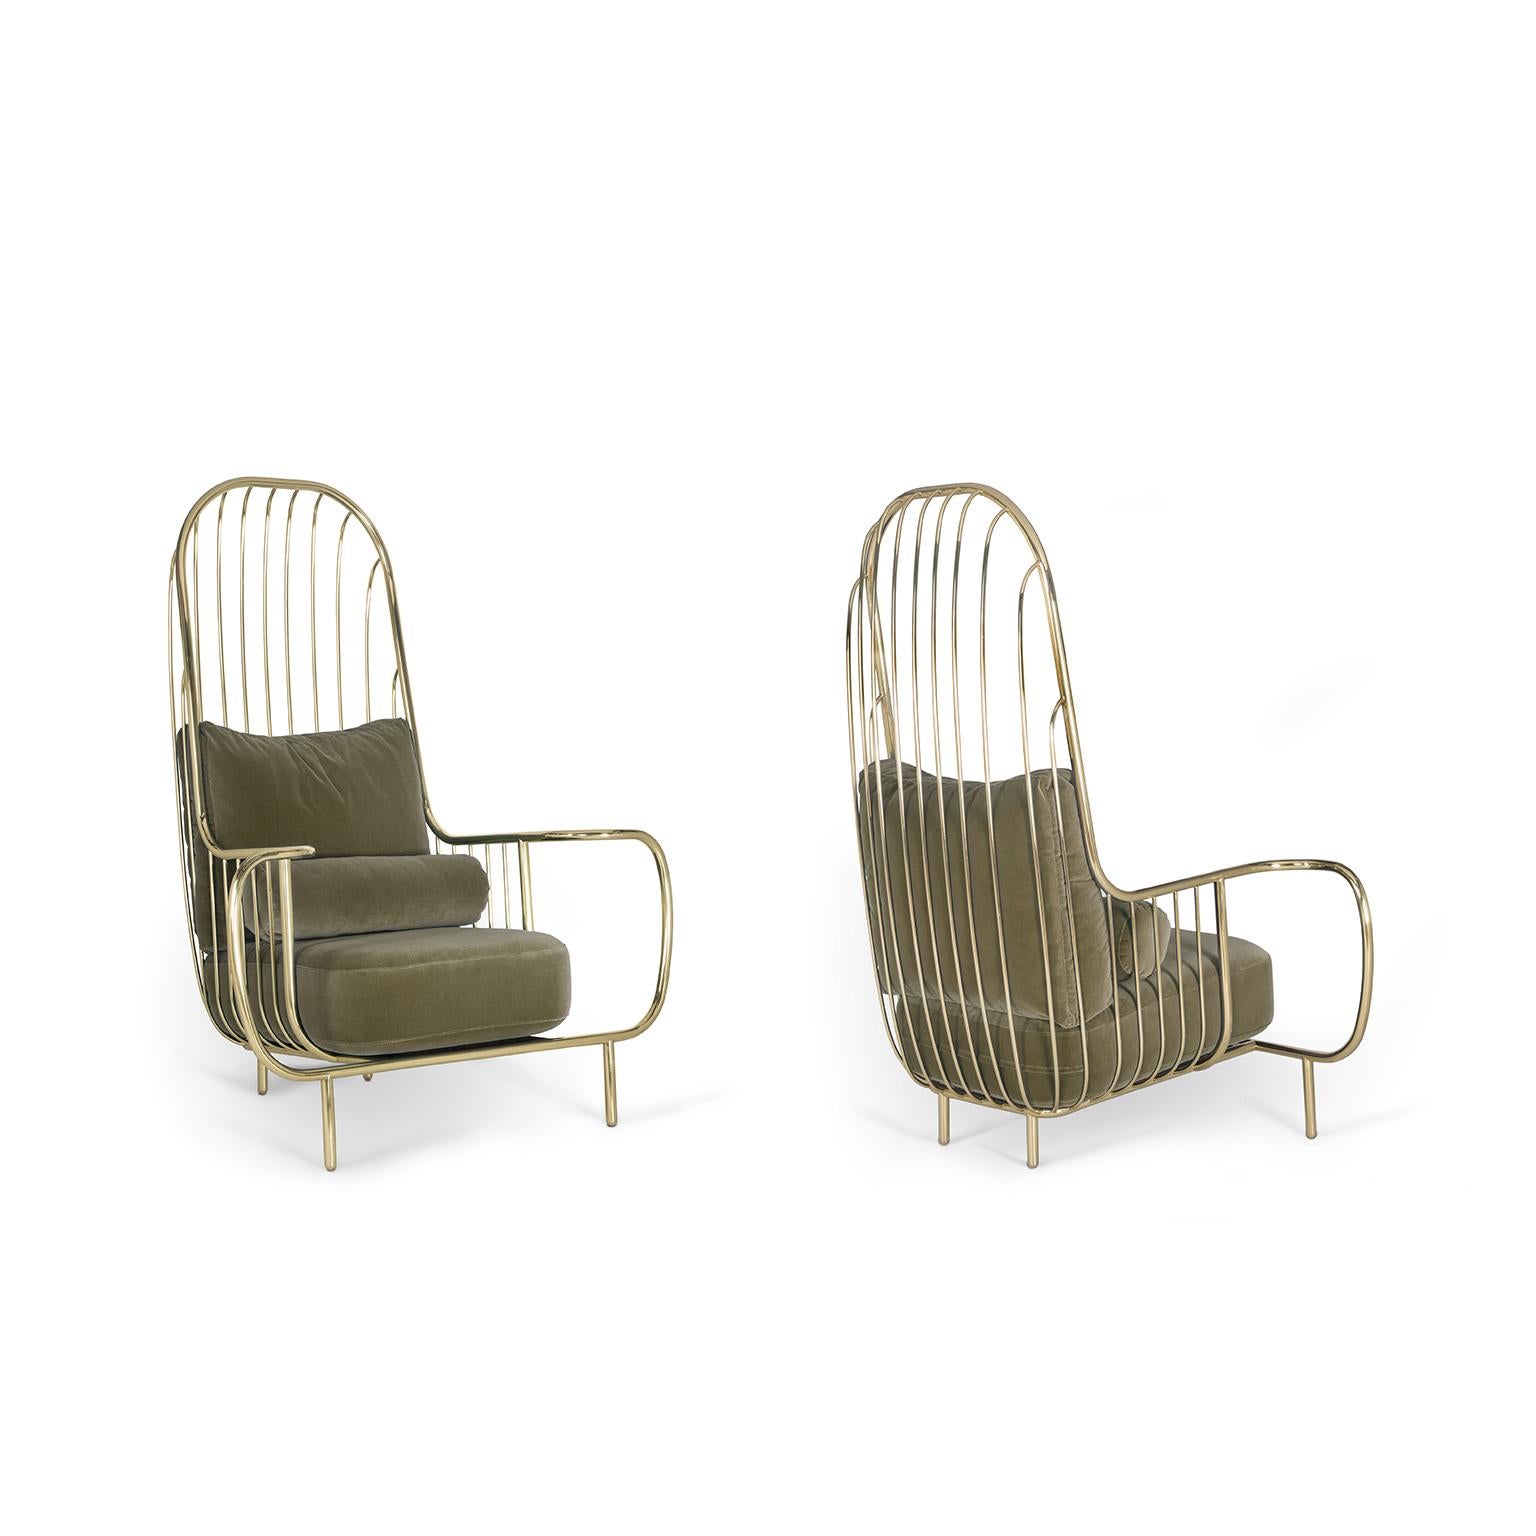 Modern Liberty Armchair High Back in Polished Brass and Olive Colour Velvet In New Condition For Sale In Oporto, PT